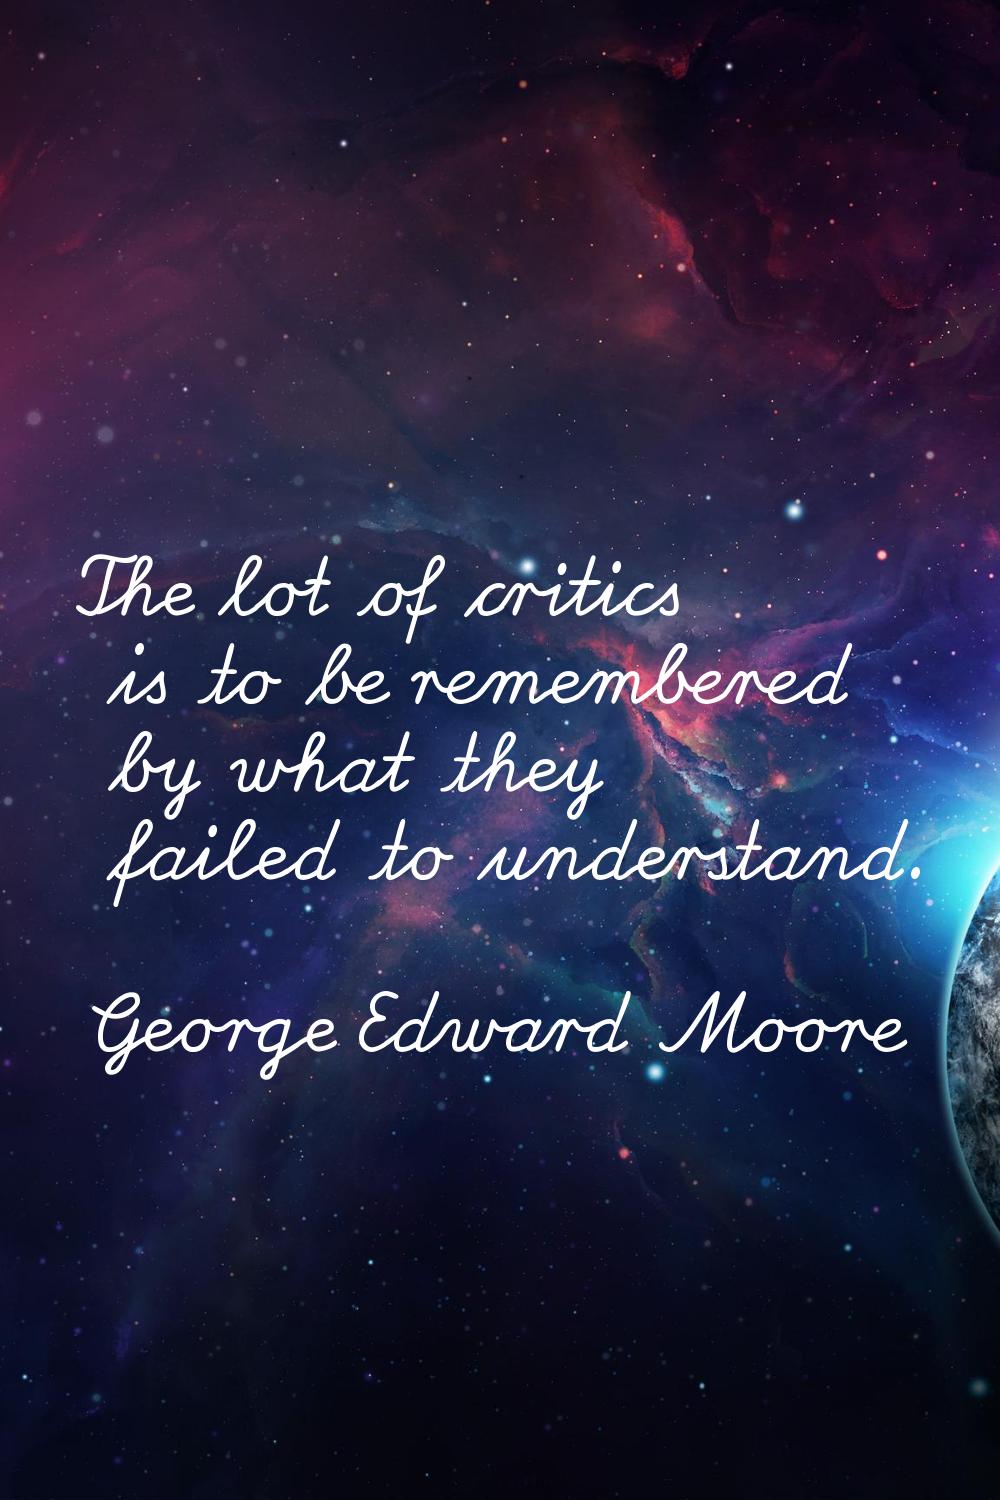 The lot of critics is to be remembered by what they failed to understand.